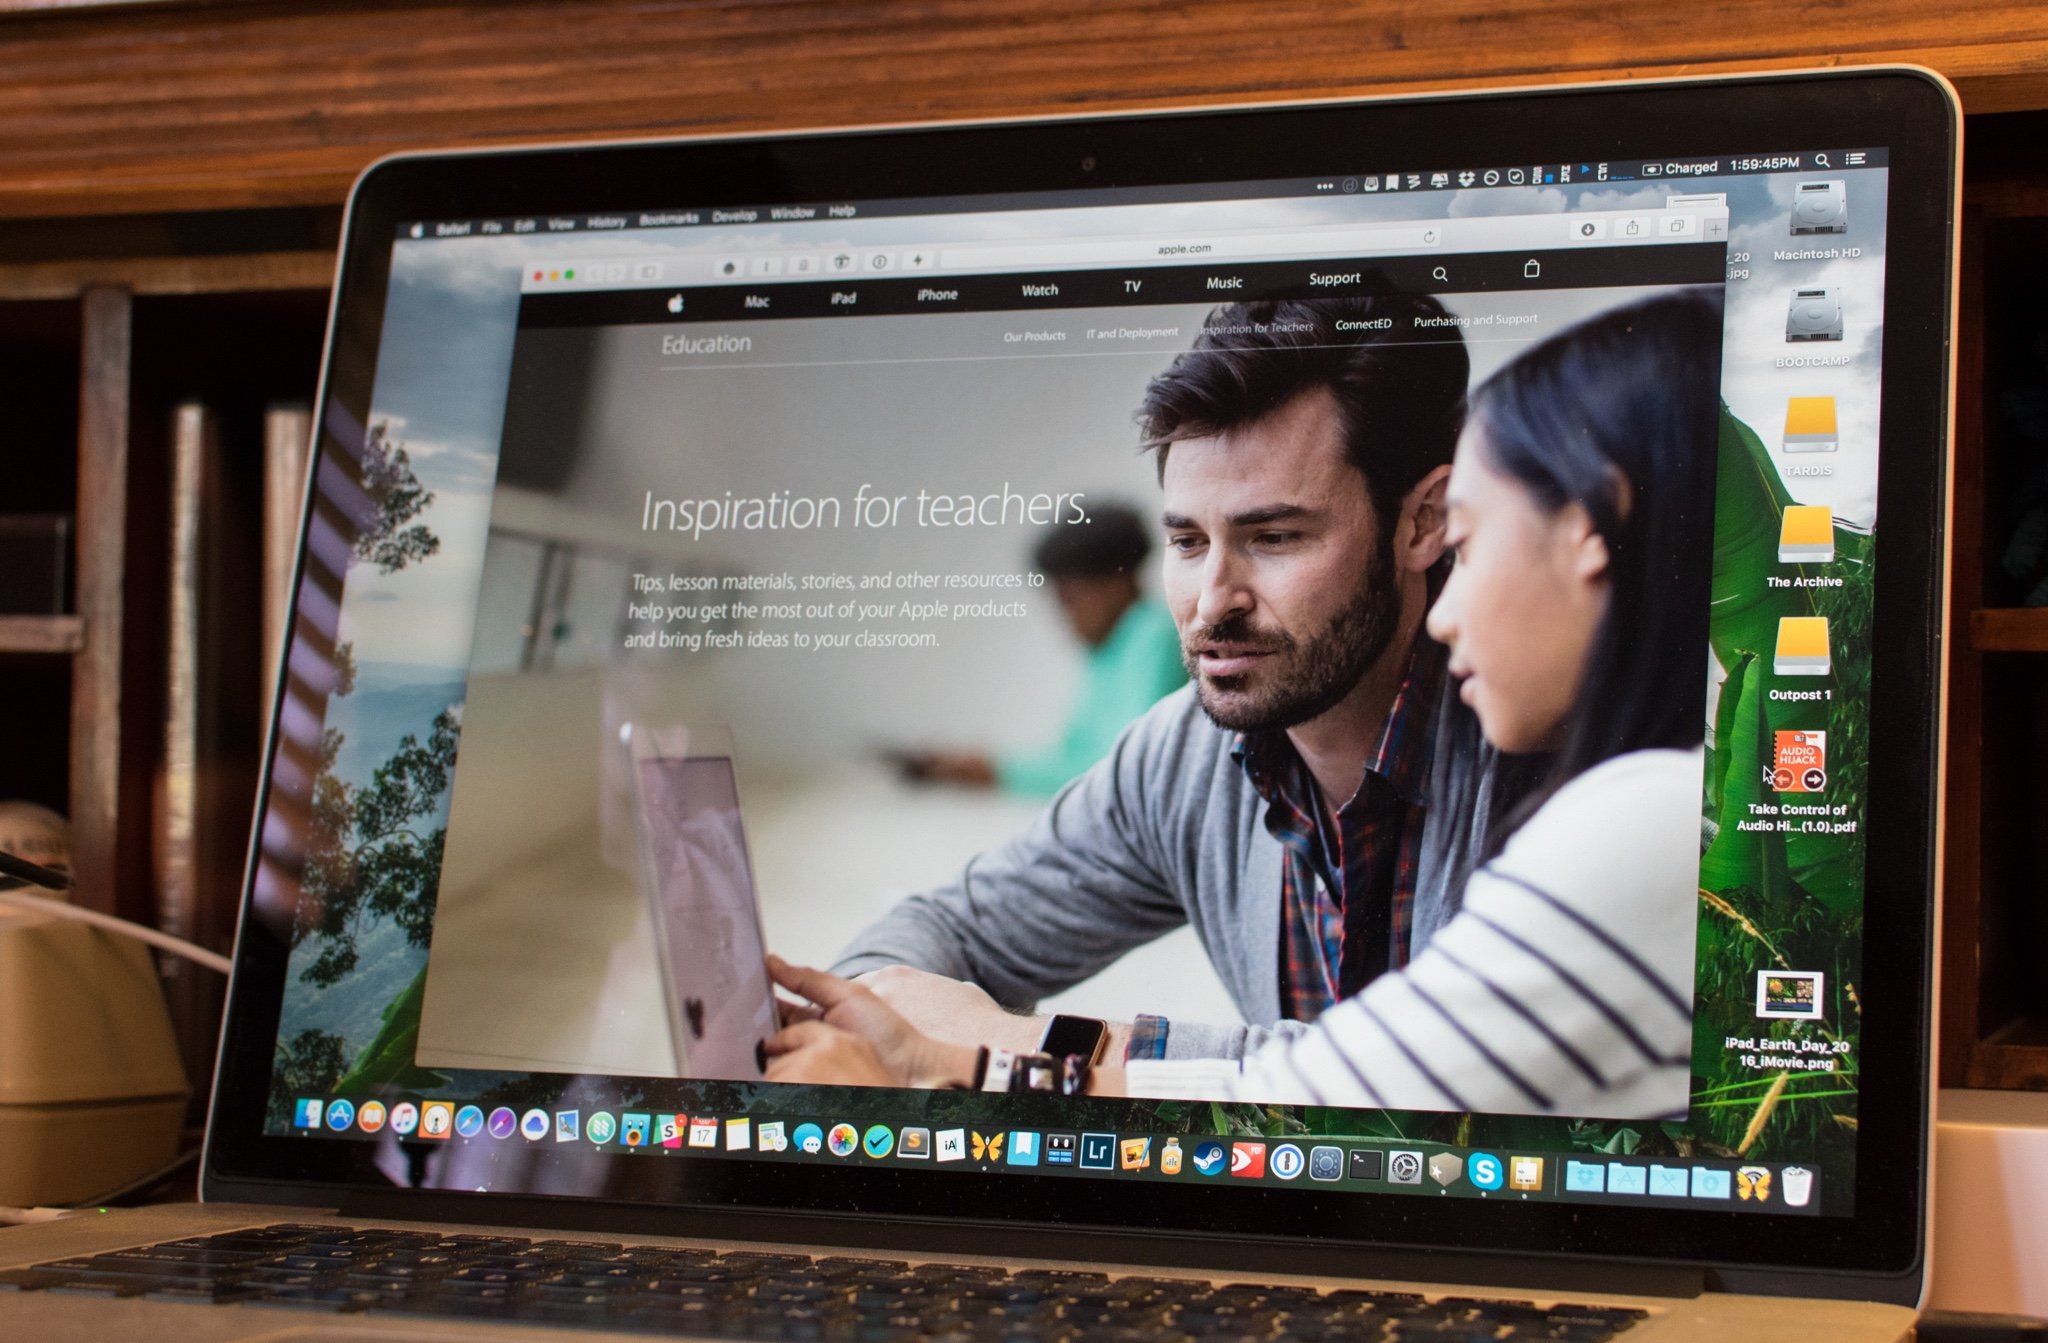 Apple offers tips for using its devices in classrooms with new site